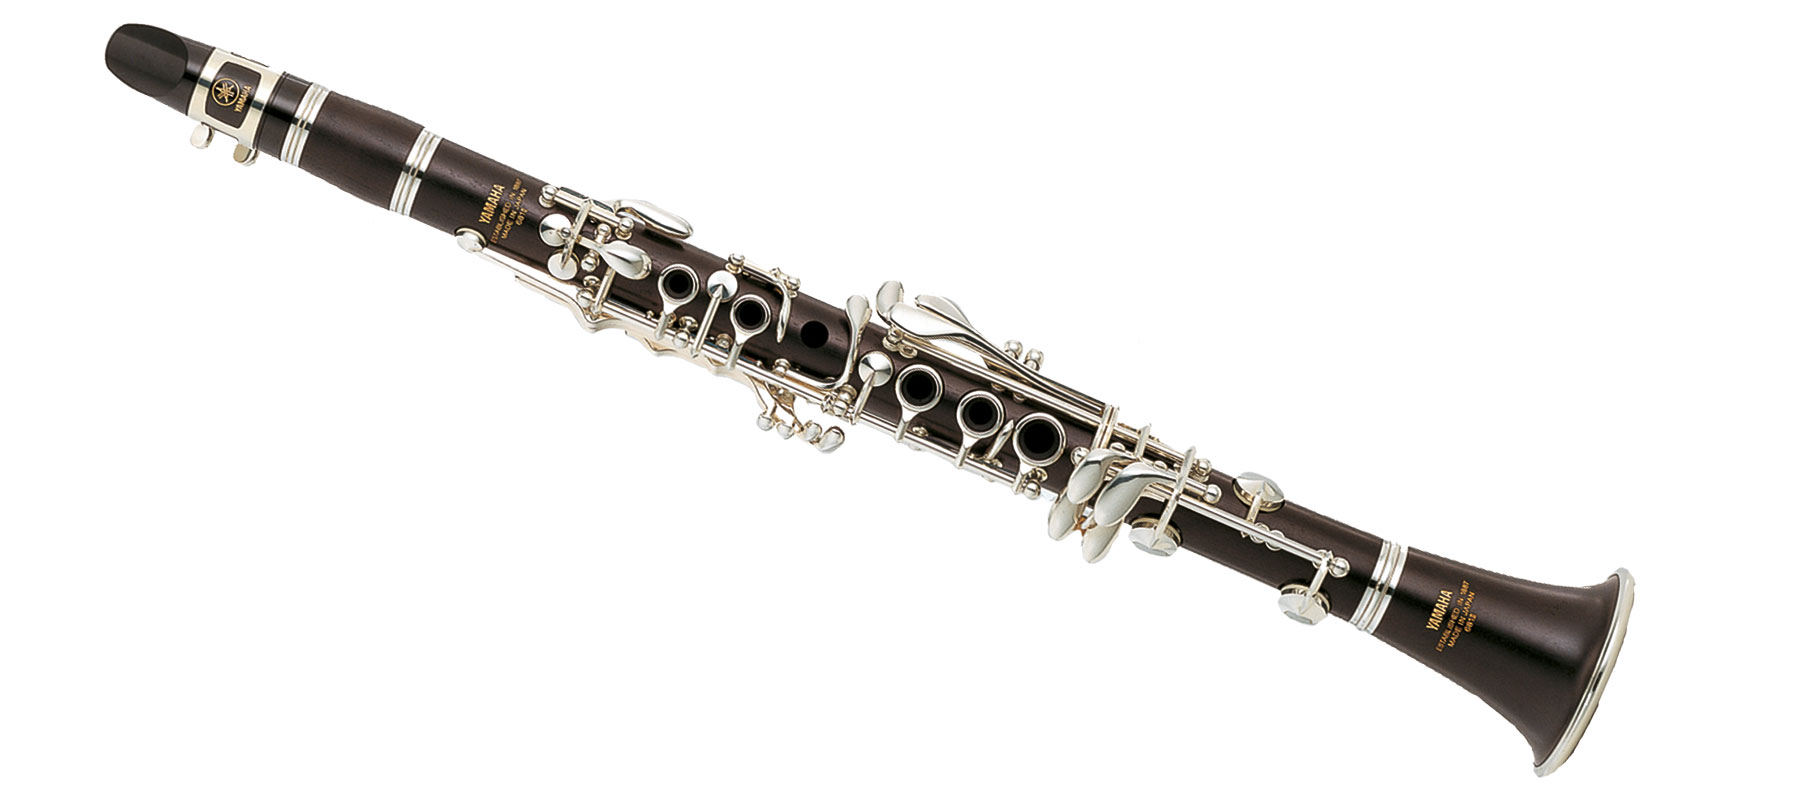 Yamaha YCL-681 II Professional Eb Clarinet for Sale in Paris